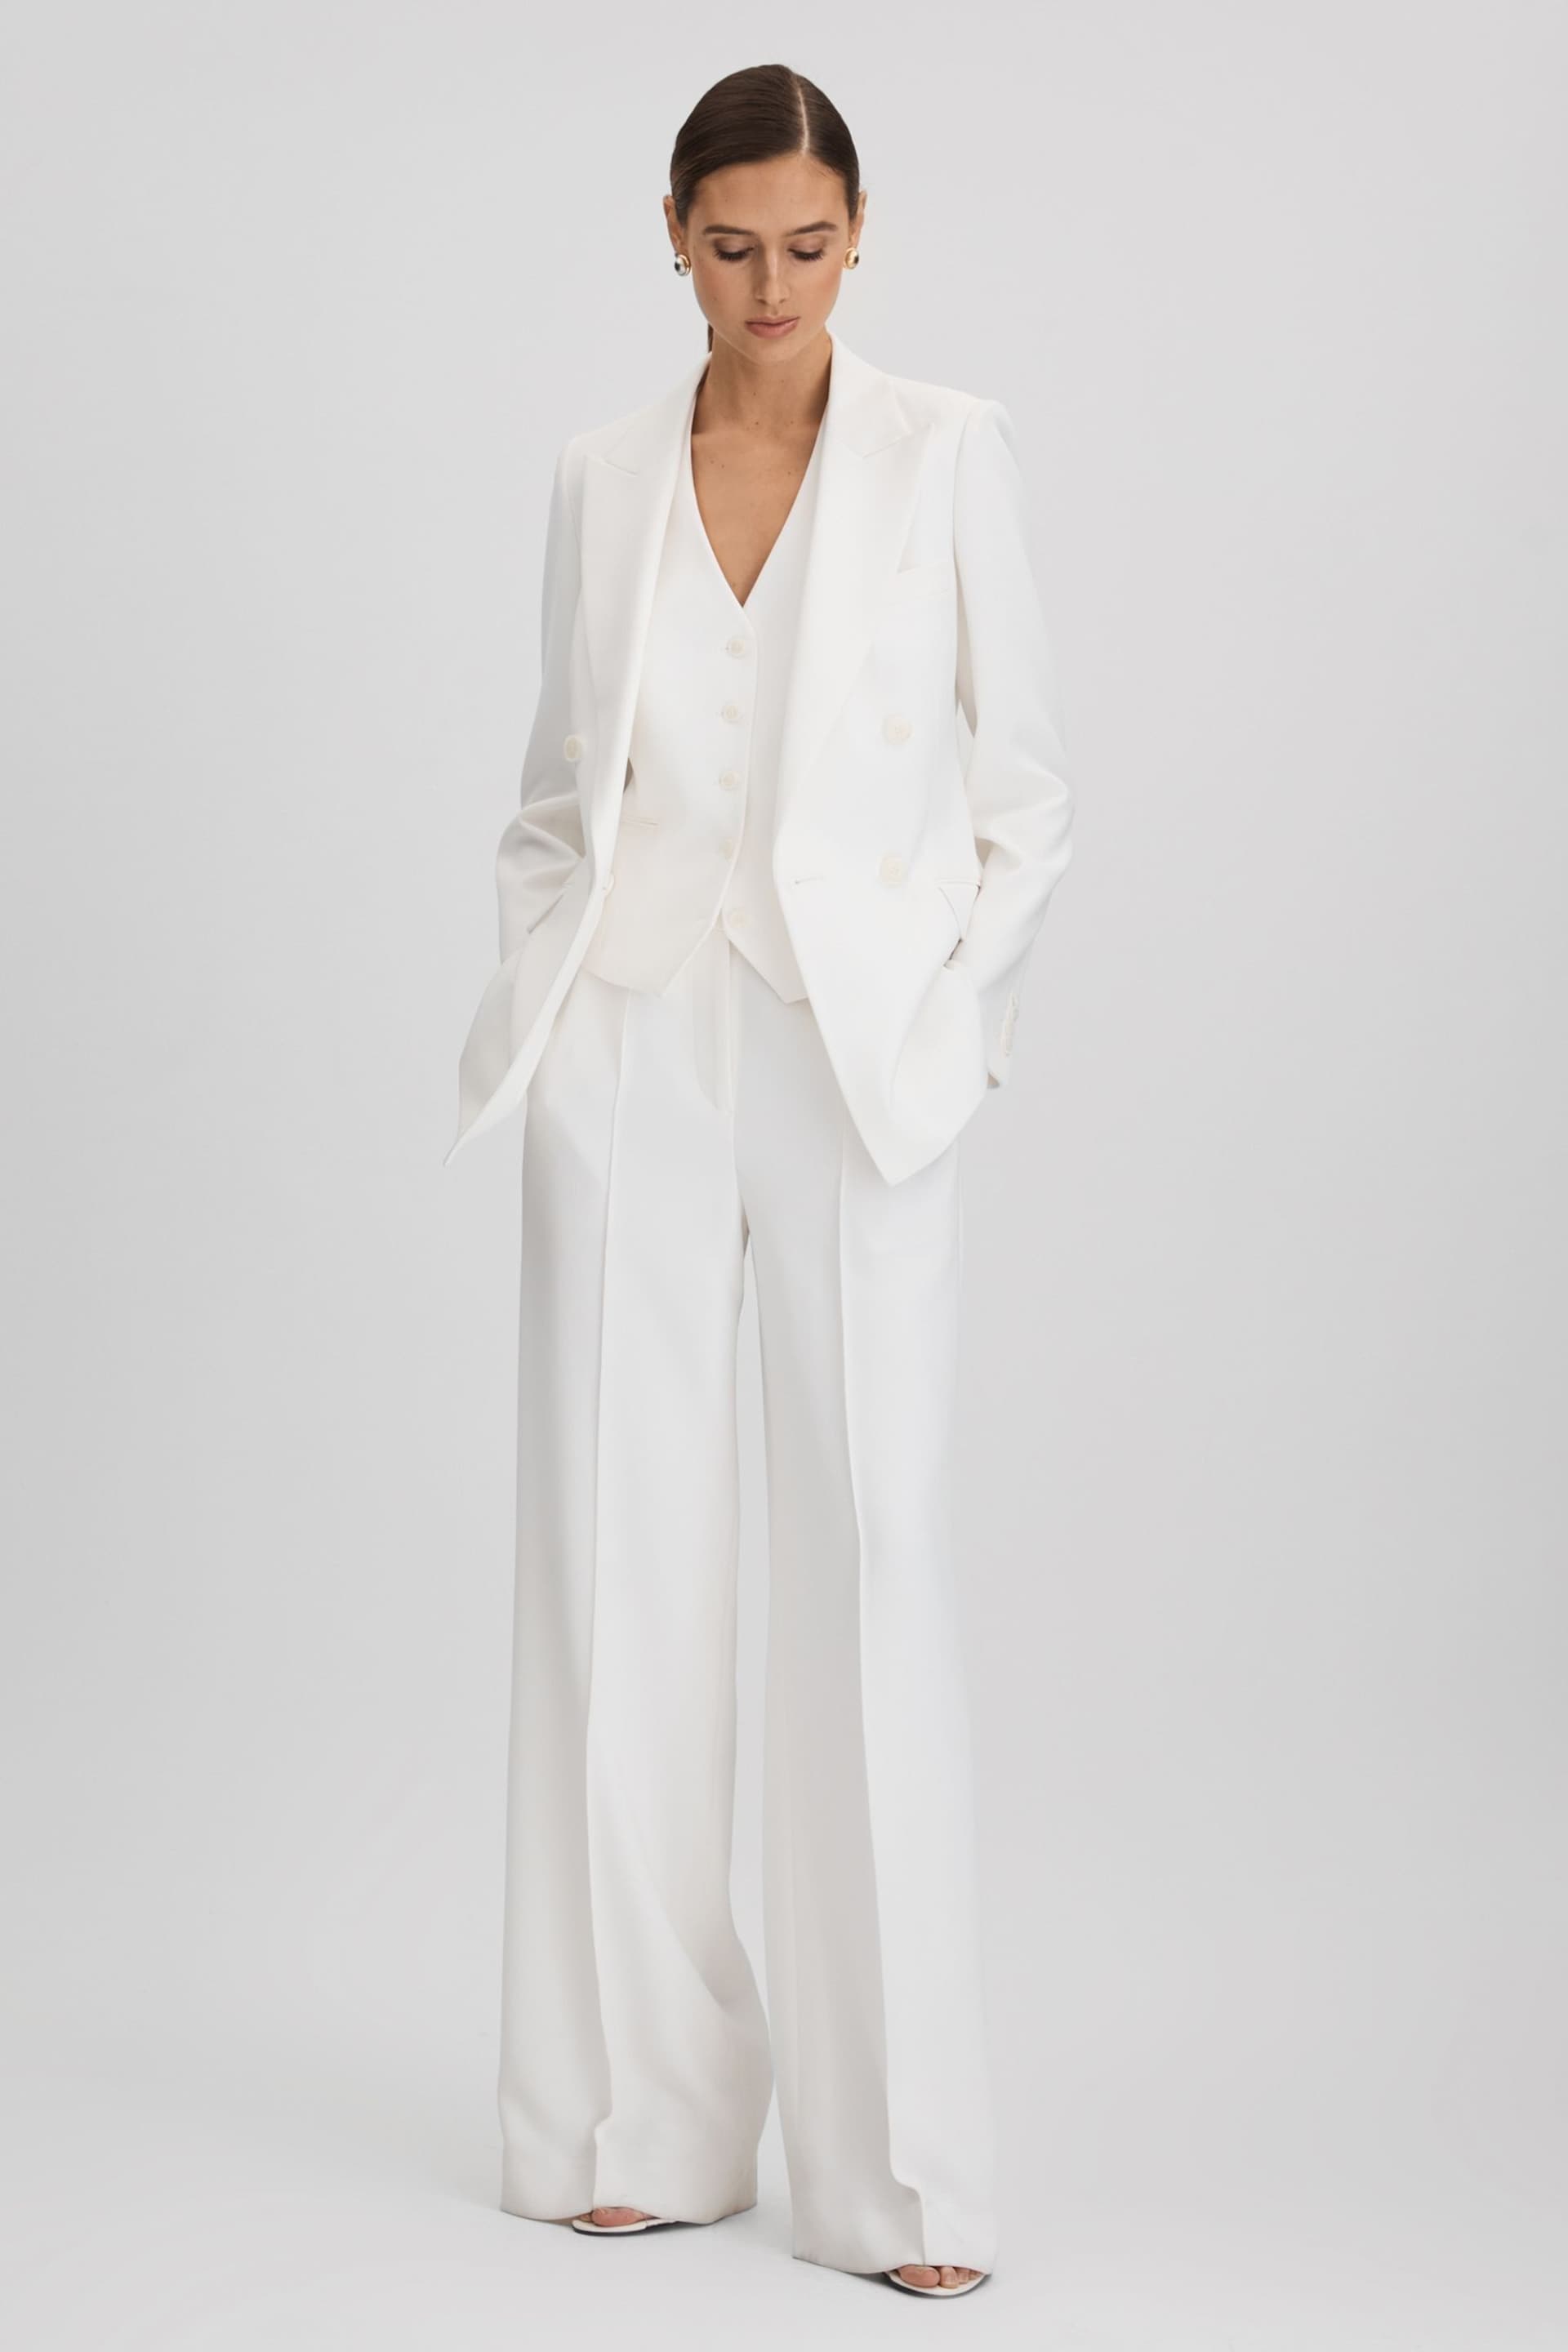 Reiss White Sienna Crepe Wide Leg Suit Trousers - Image 1 of 7